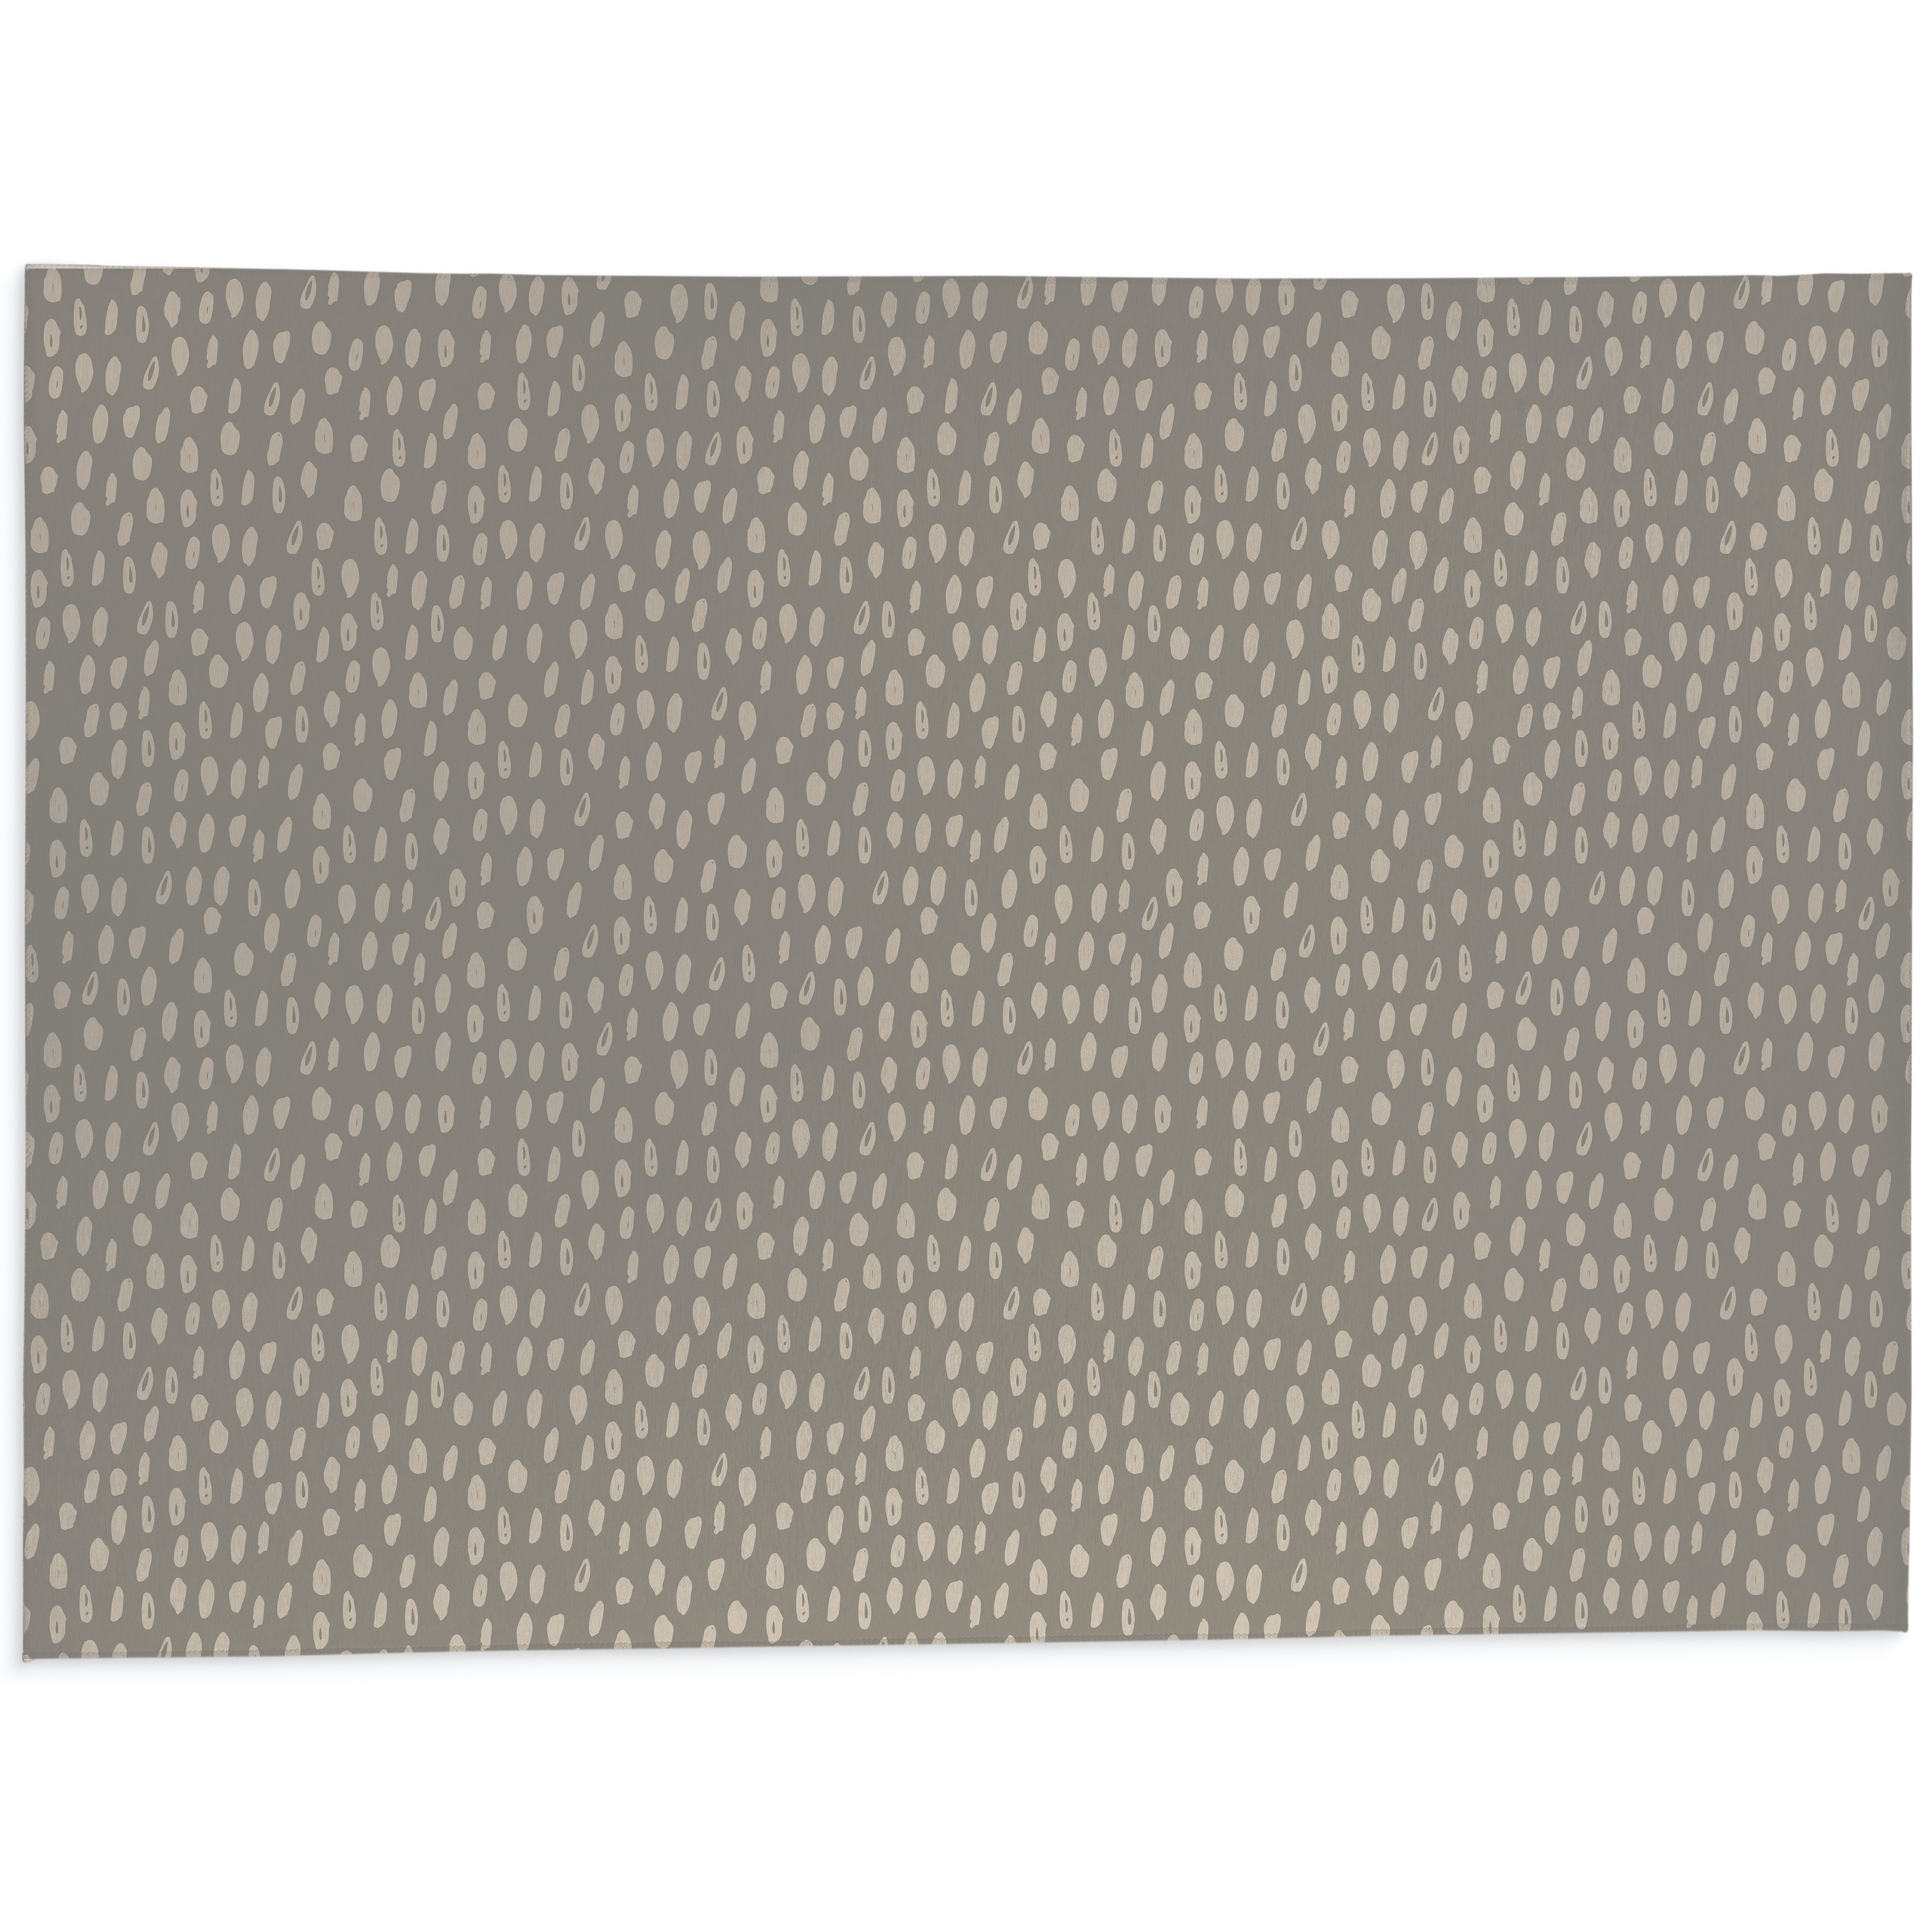 https://ak1.ostkcdn.com/images/products/is/images/direct/03af293e3e0aa1e4455d779c77d92f1fbb784cbe/POLKA-DOT-ABSTRACT-TAUPE-Indoor-Door-Mat-By-Kavka-Designs.jpg